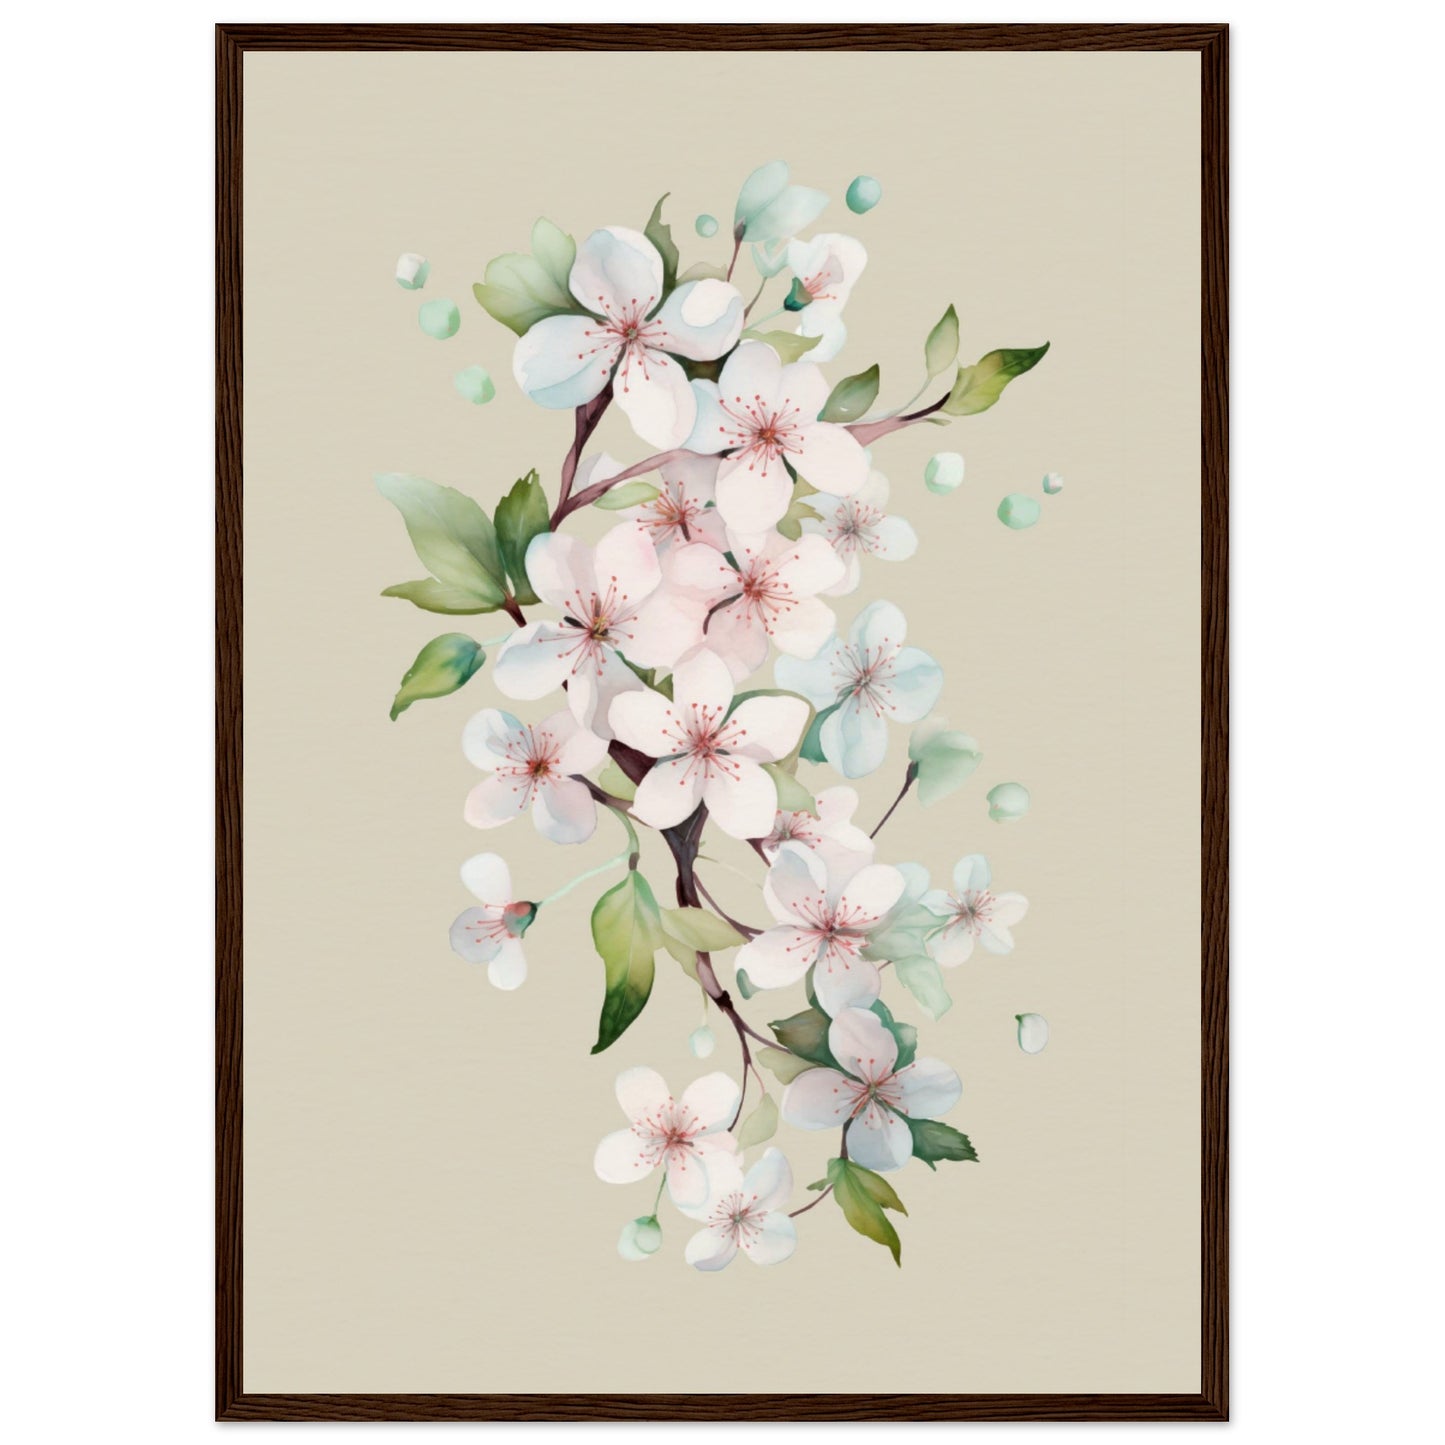 CHERRY BLOSSOMS No. 1 IN PINK BACKGROUND - in Museum-Quality Matte Paper Wooden Framed Poster